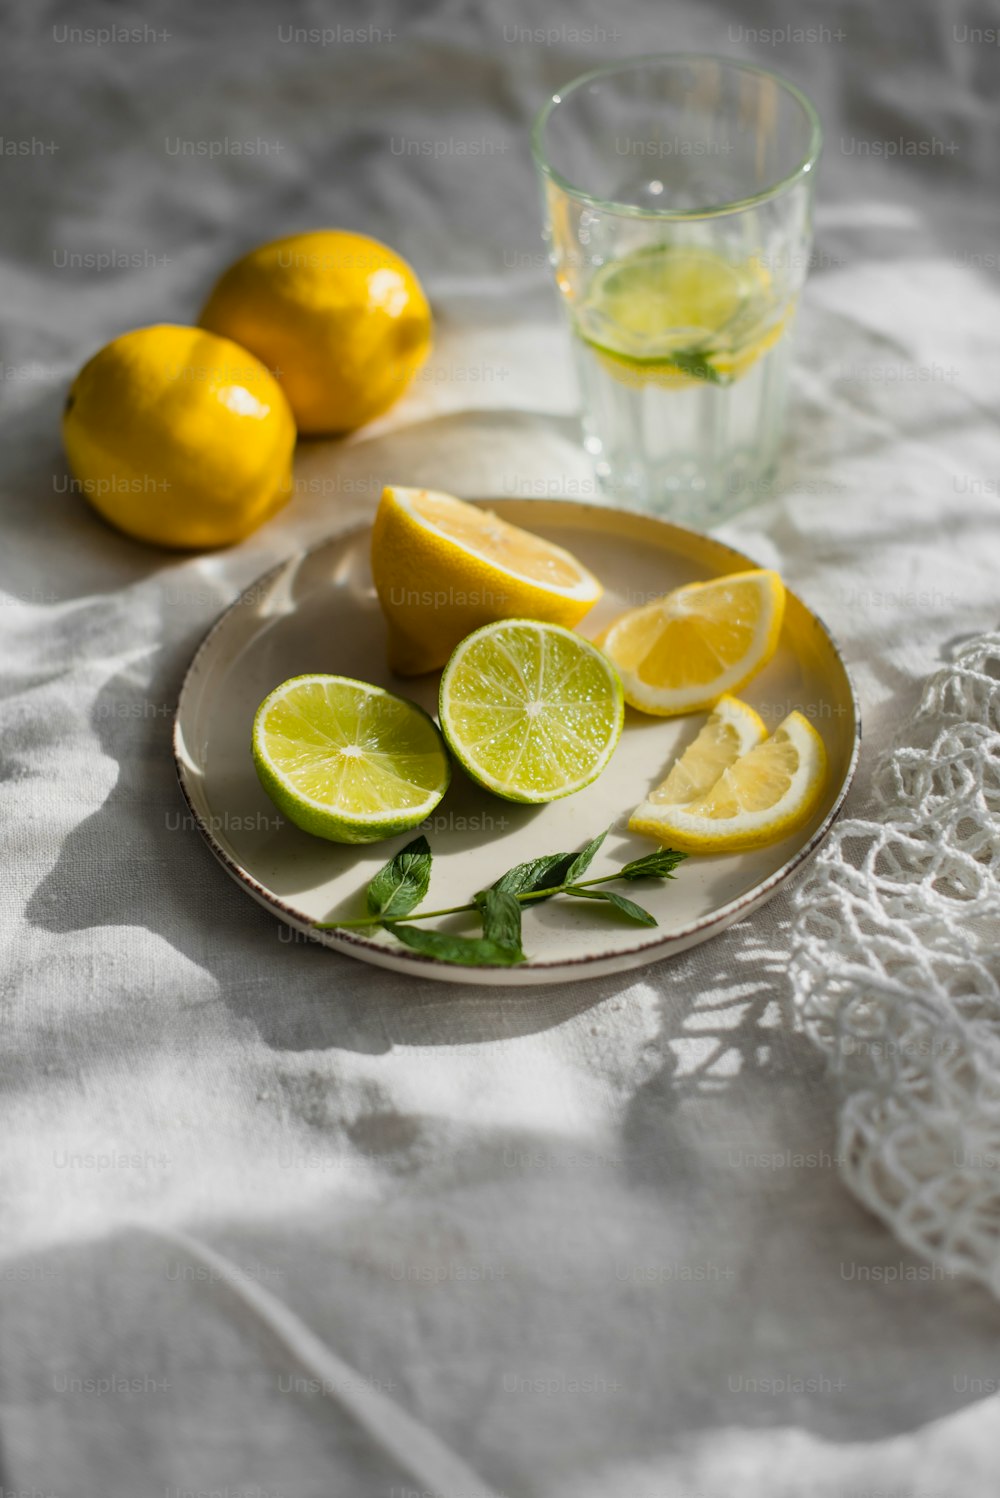 a plate of lemons and a glass of water